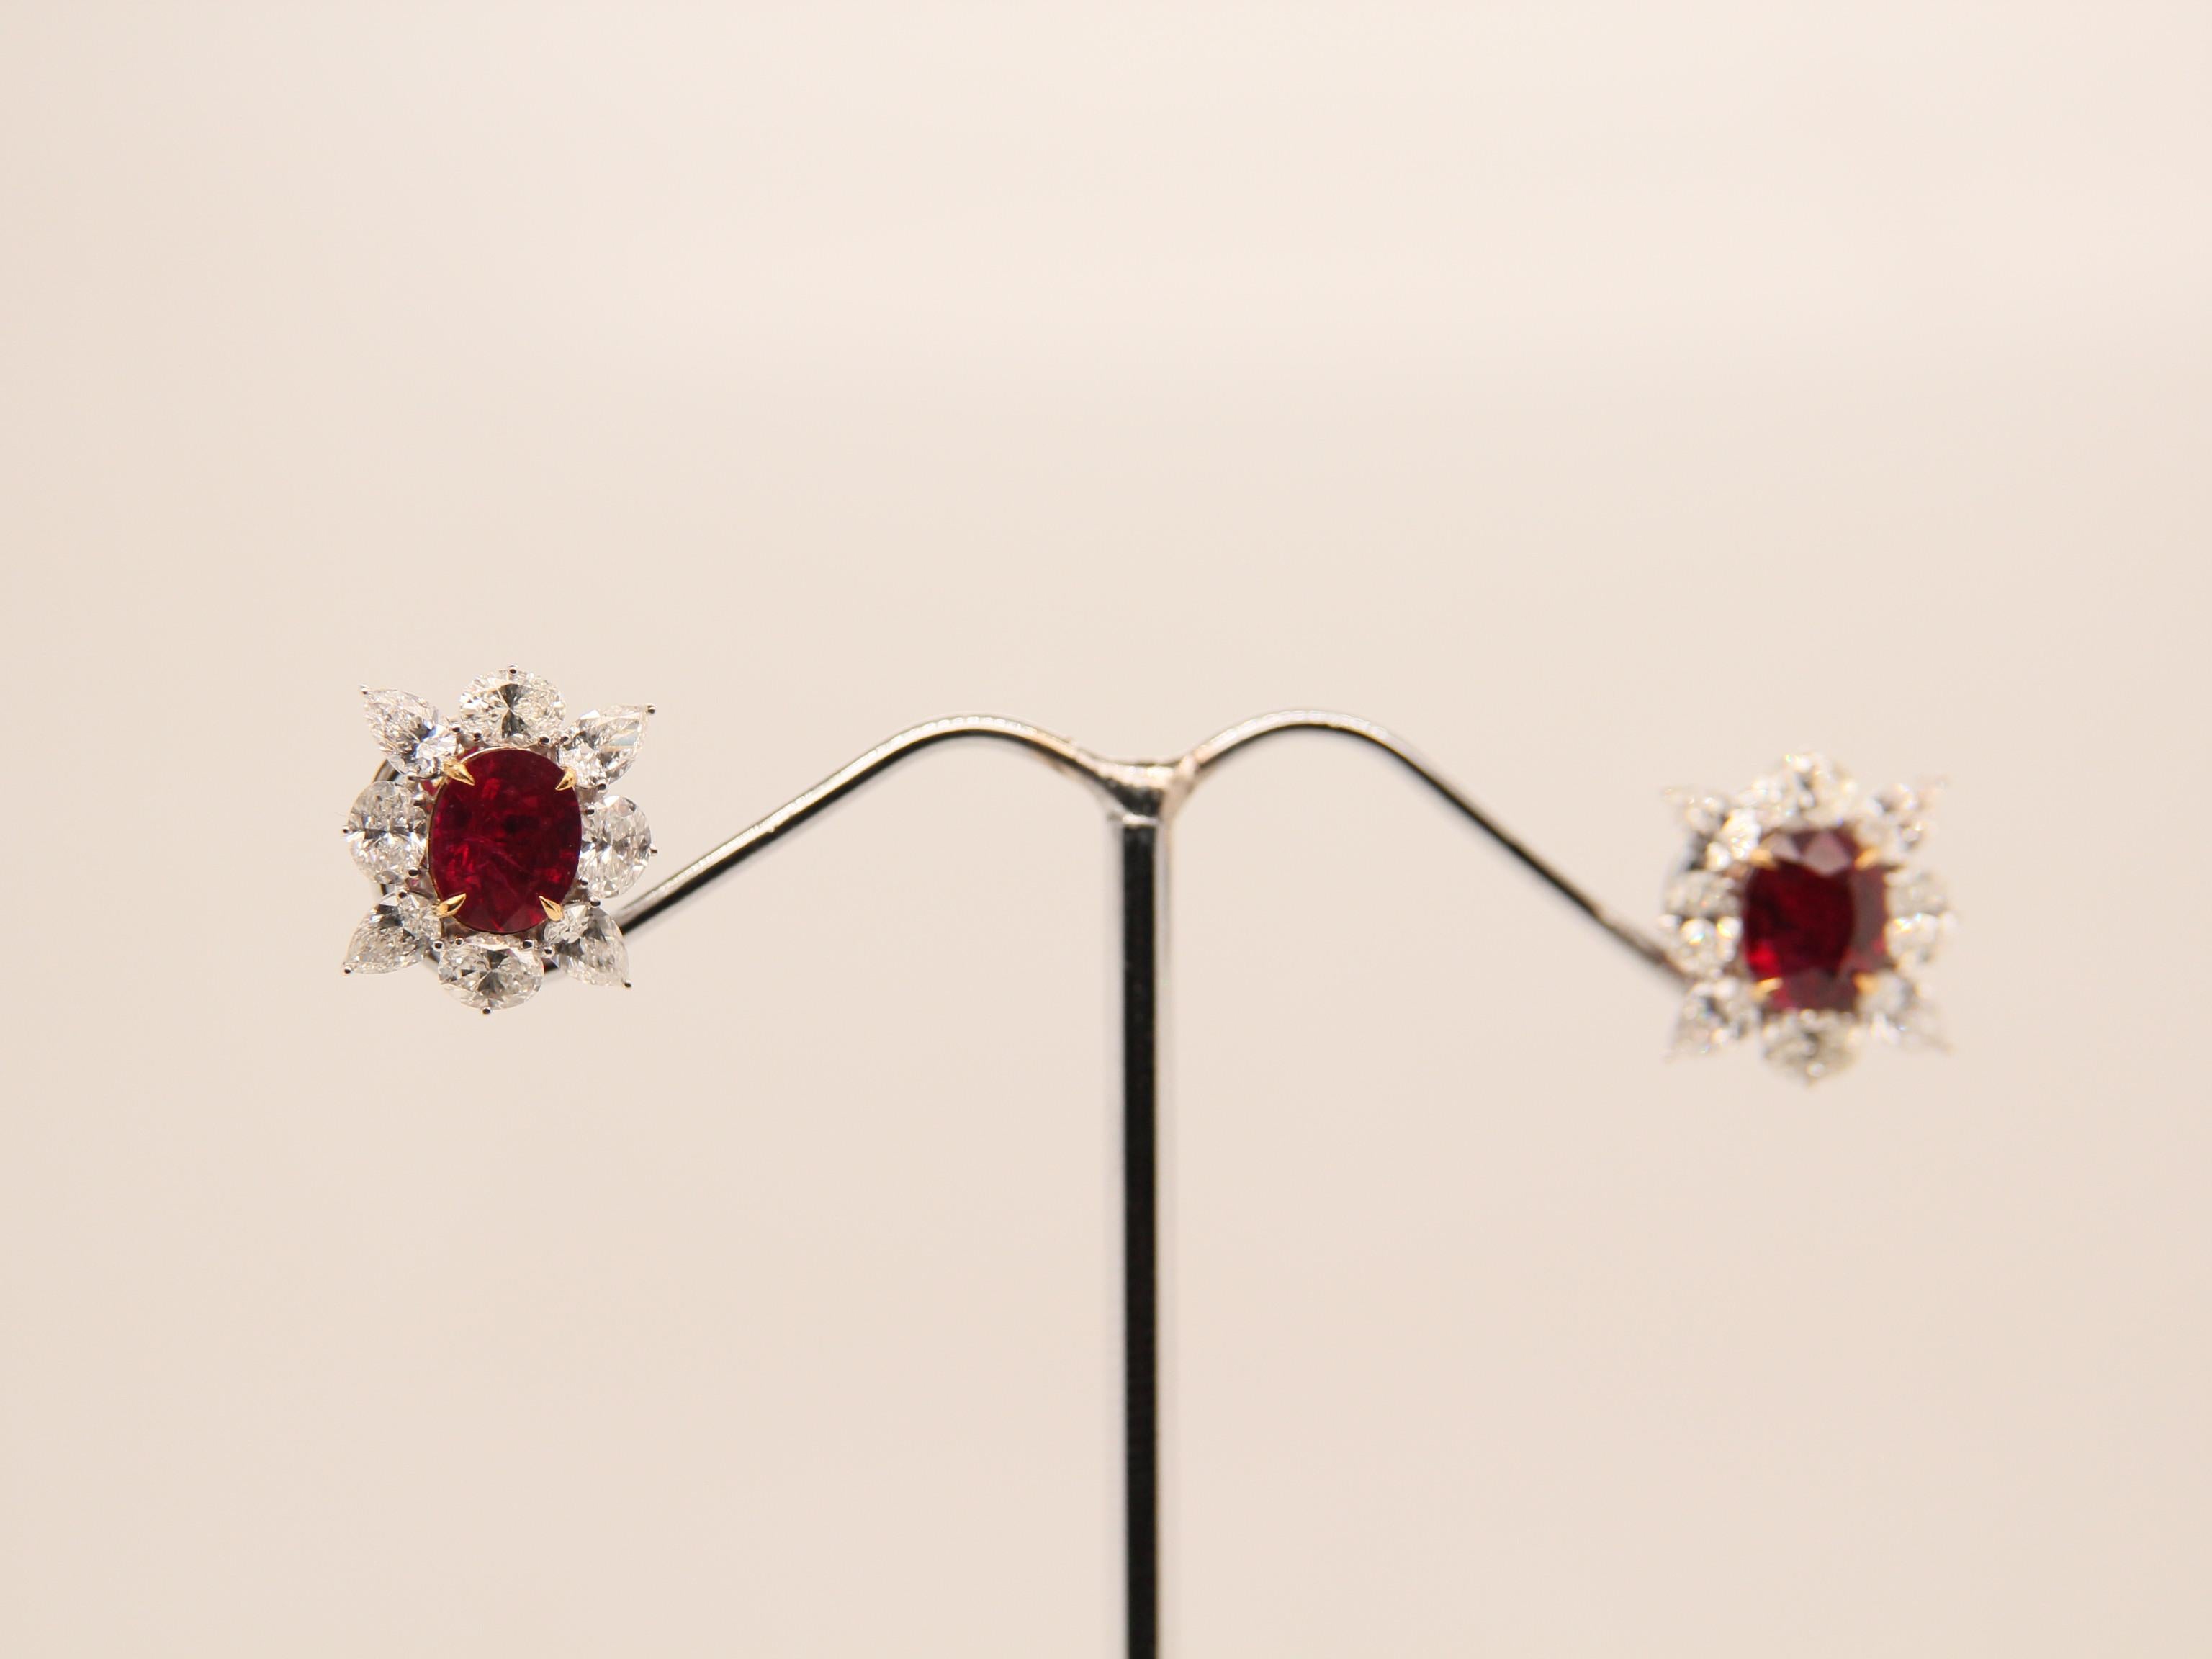 A brand new handcrafted ruby earring by Rewa Jewels. The earring’s center stones weigh 1.61ct and 1.32ct, are of Burmese origin and certified by Gem Research Swisslab (GRS) as natural, unheated, 'Pigeon blood' with certificate numbers 2022-060405